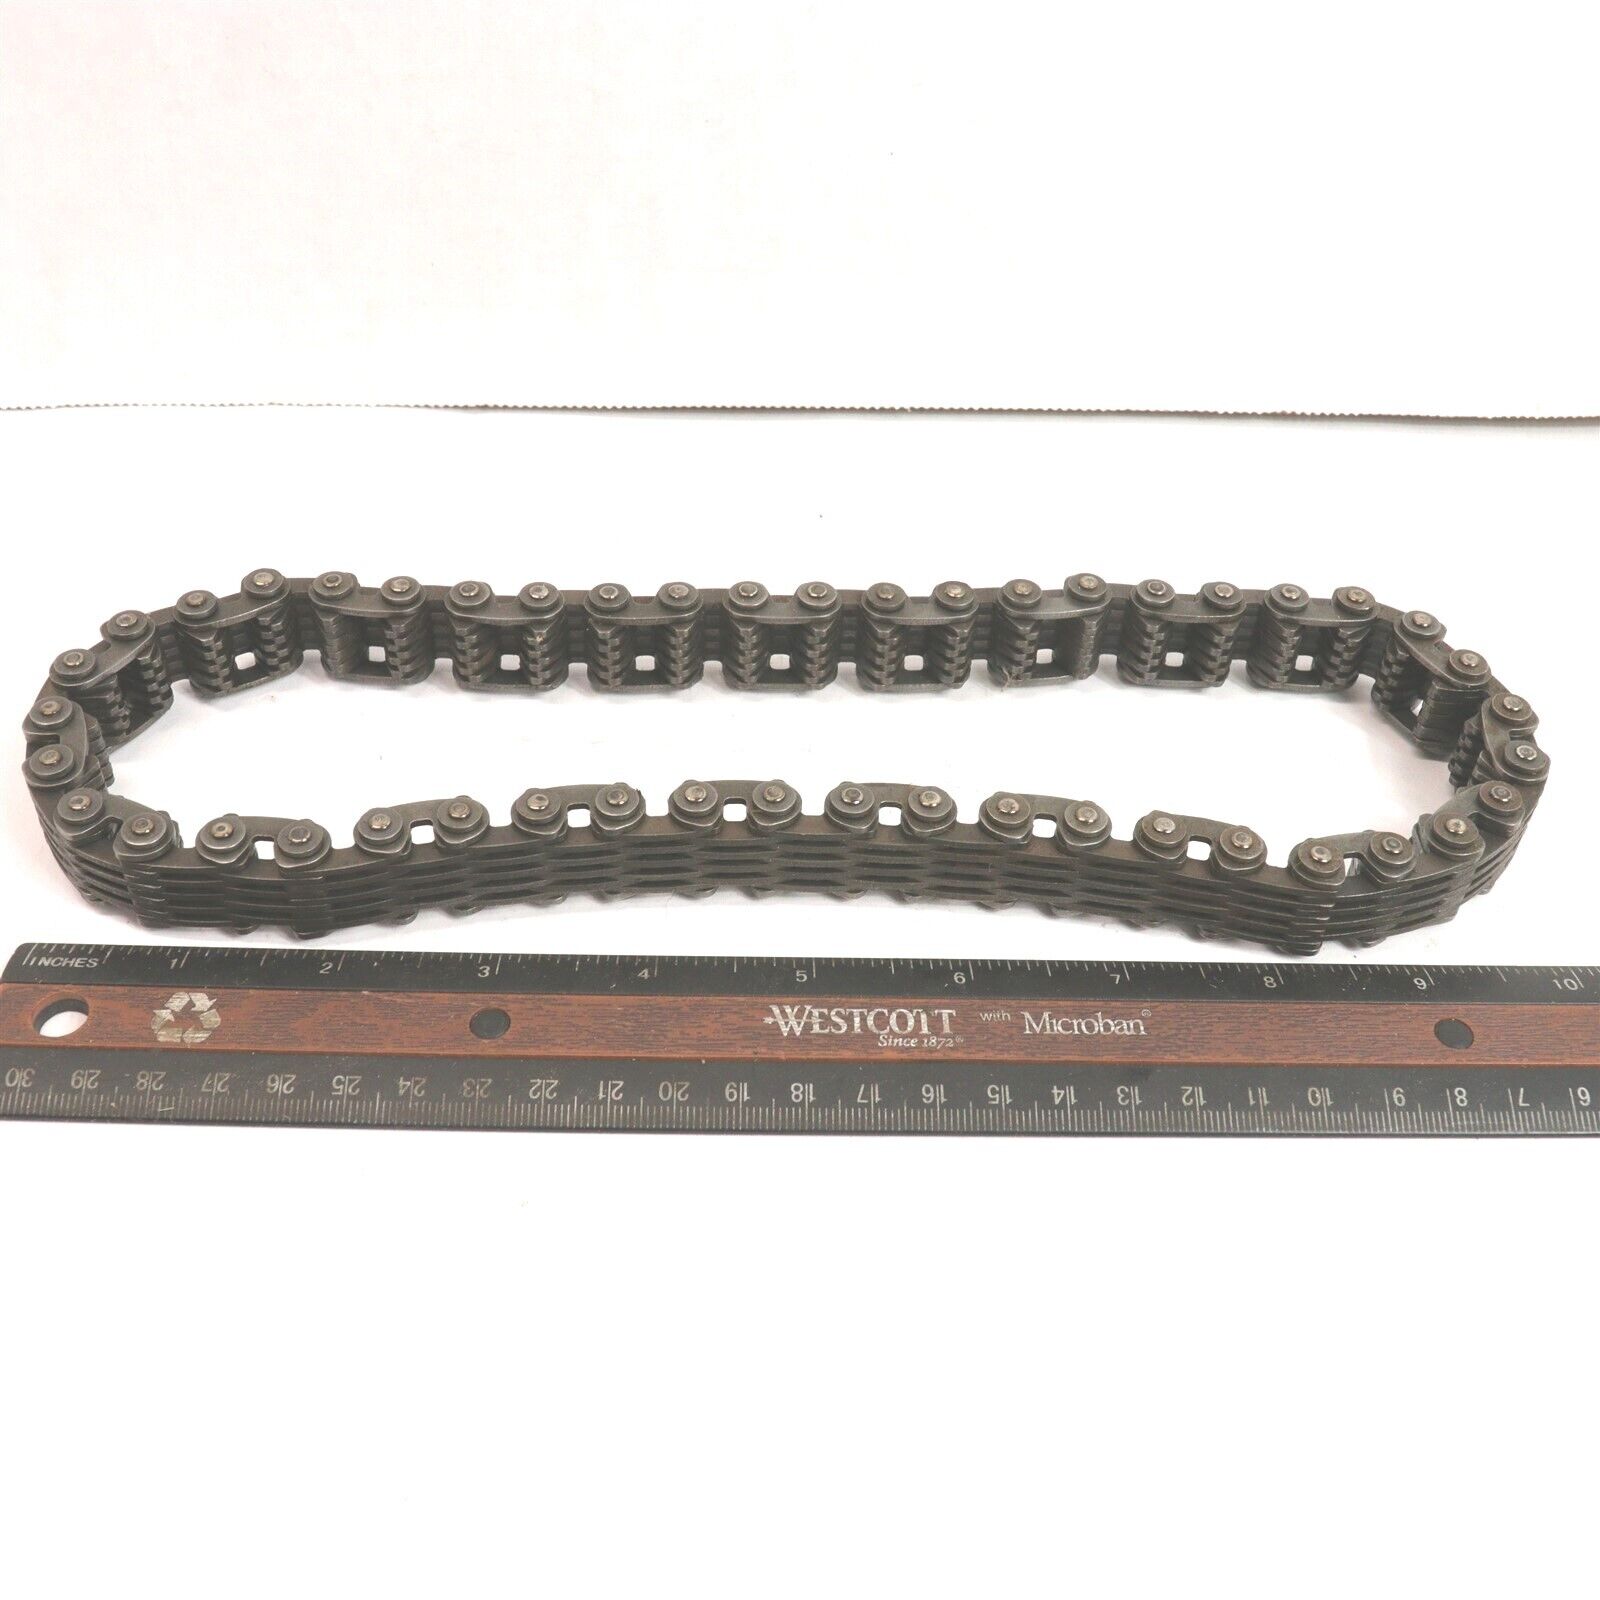 1959-66 CHEVY CADDY WILLYS STUDEBAKER TIMING CHAIN GM# 3704150 NORS #R-489